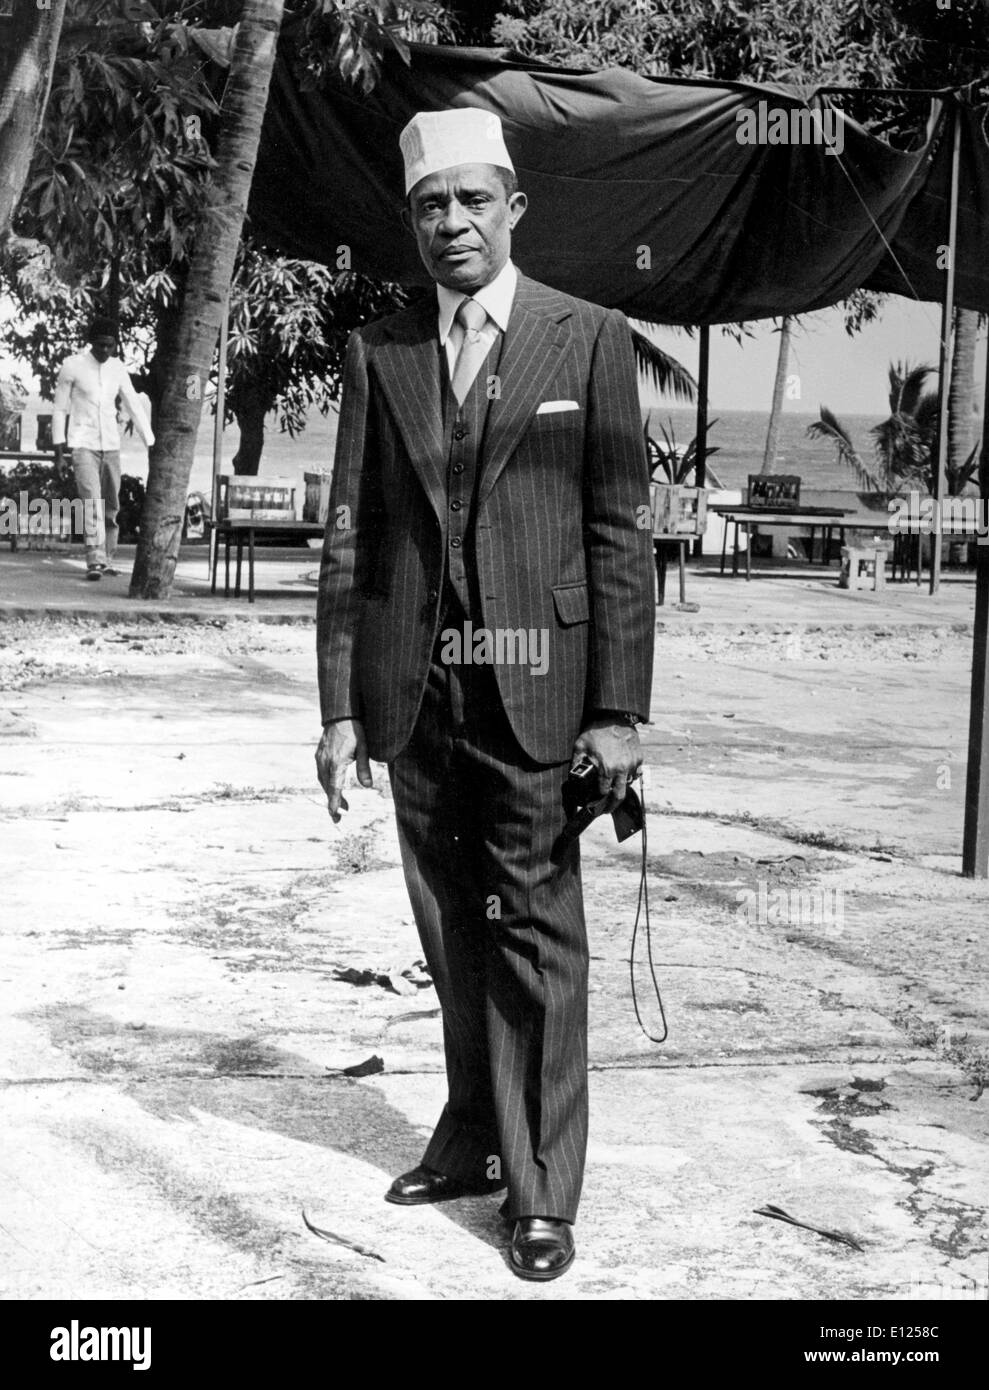 May 12, 1987; Mutsamudu, Comoros; Co-President of Comoros AHMED ABDALLAH was born in June 12th, 1919 in Dimoni, on the island of Anjouan in Comoros, located in the Indian Ocean. He was the first president of the Comoros Islands after independence from France. Abdallah began participating in government in the 1940's and soon became one of the most important non-French political figures in the Comoros. He was the president of the general council from 1949 until 1953. He was killed in a coup on November 27th, 1989. (Credit Image: KEYSTONE Pictures USA/ZUMAPRESS.com) Stock Photo